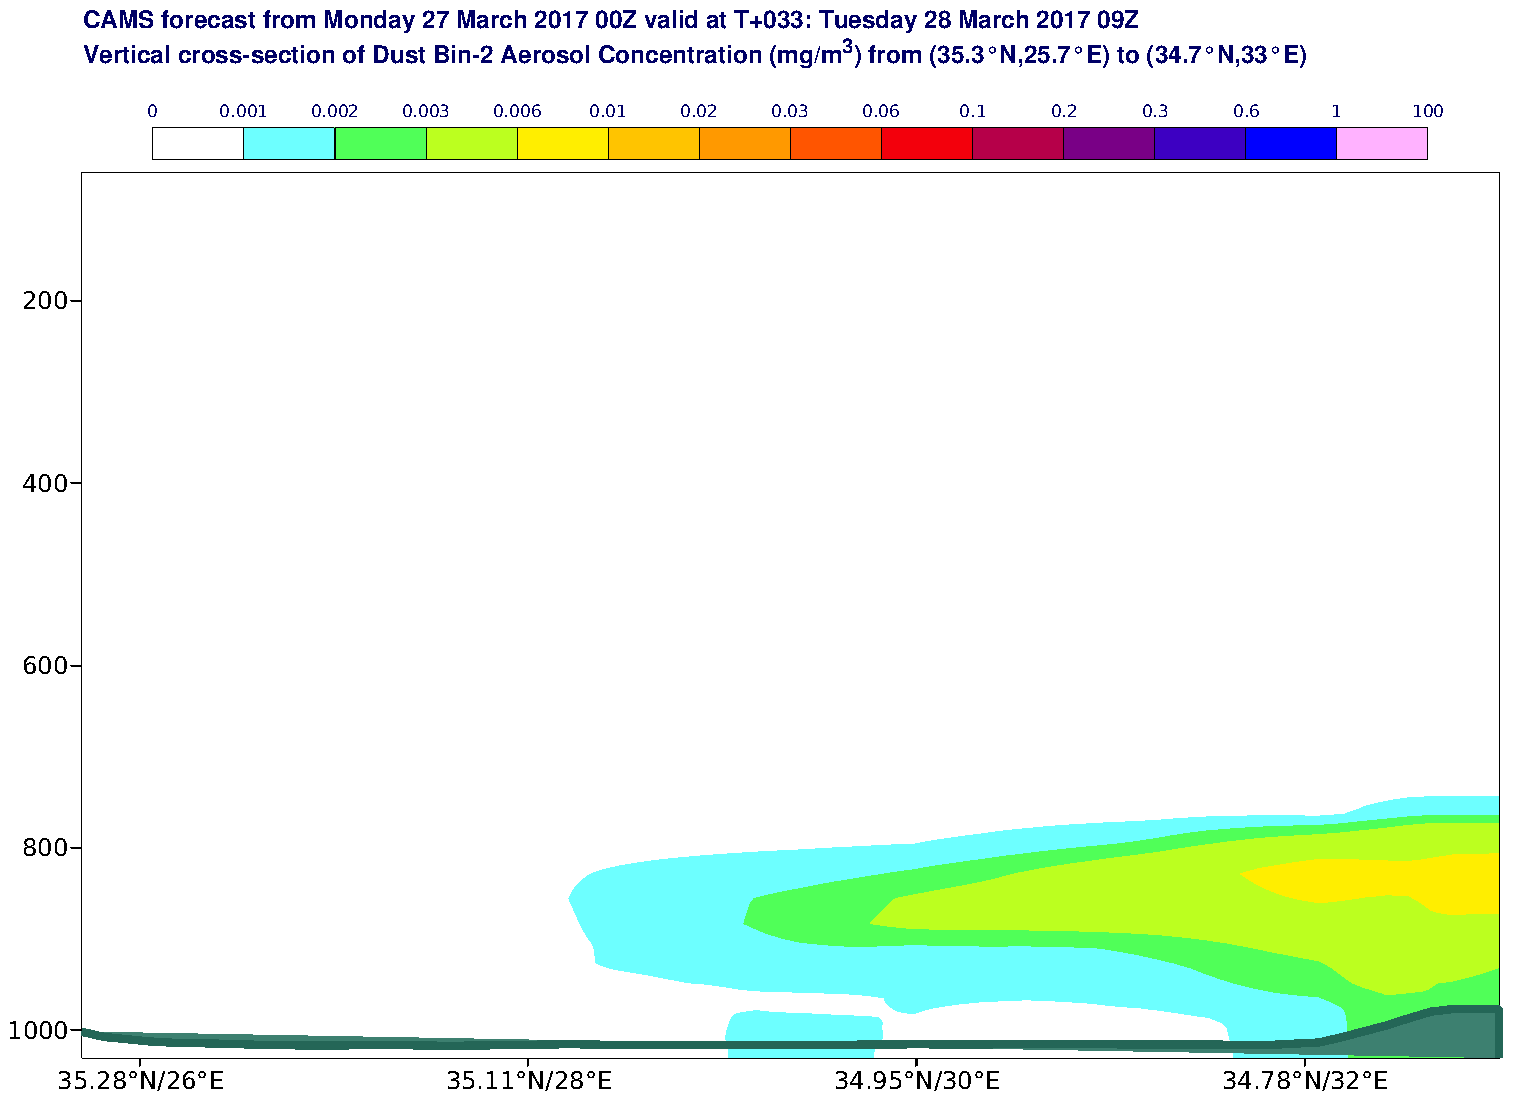 Vertical cross-section of Dust Bin-2 Aerosol Concentration (mg/m3) valid at T33 - 2017-03-28 09:00